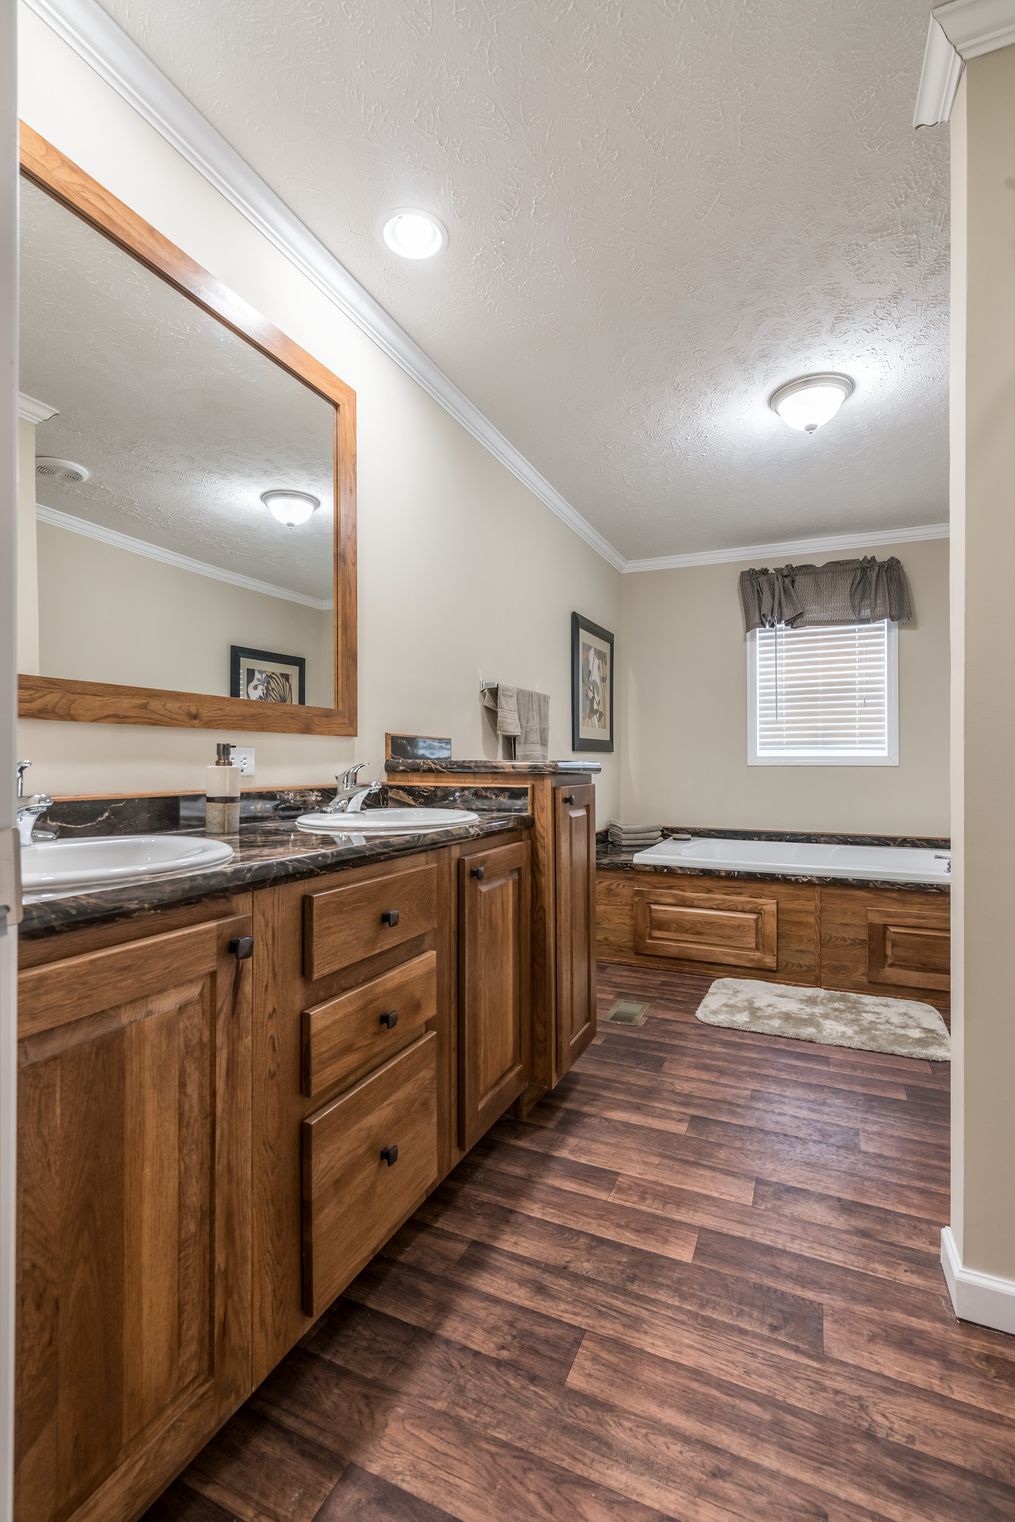 The BROOKLINE FLEX Master Bathroom. This Manufactured Mobile Home features 4 bedrooms and 2 baths.